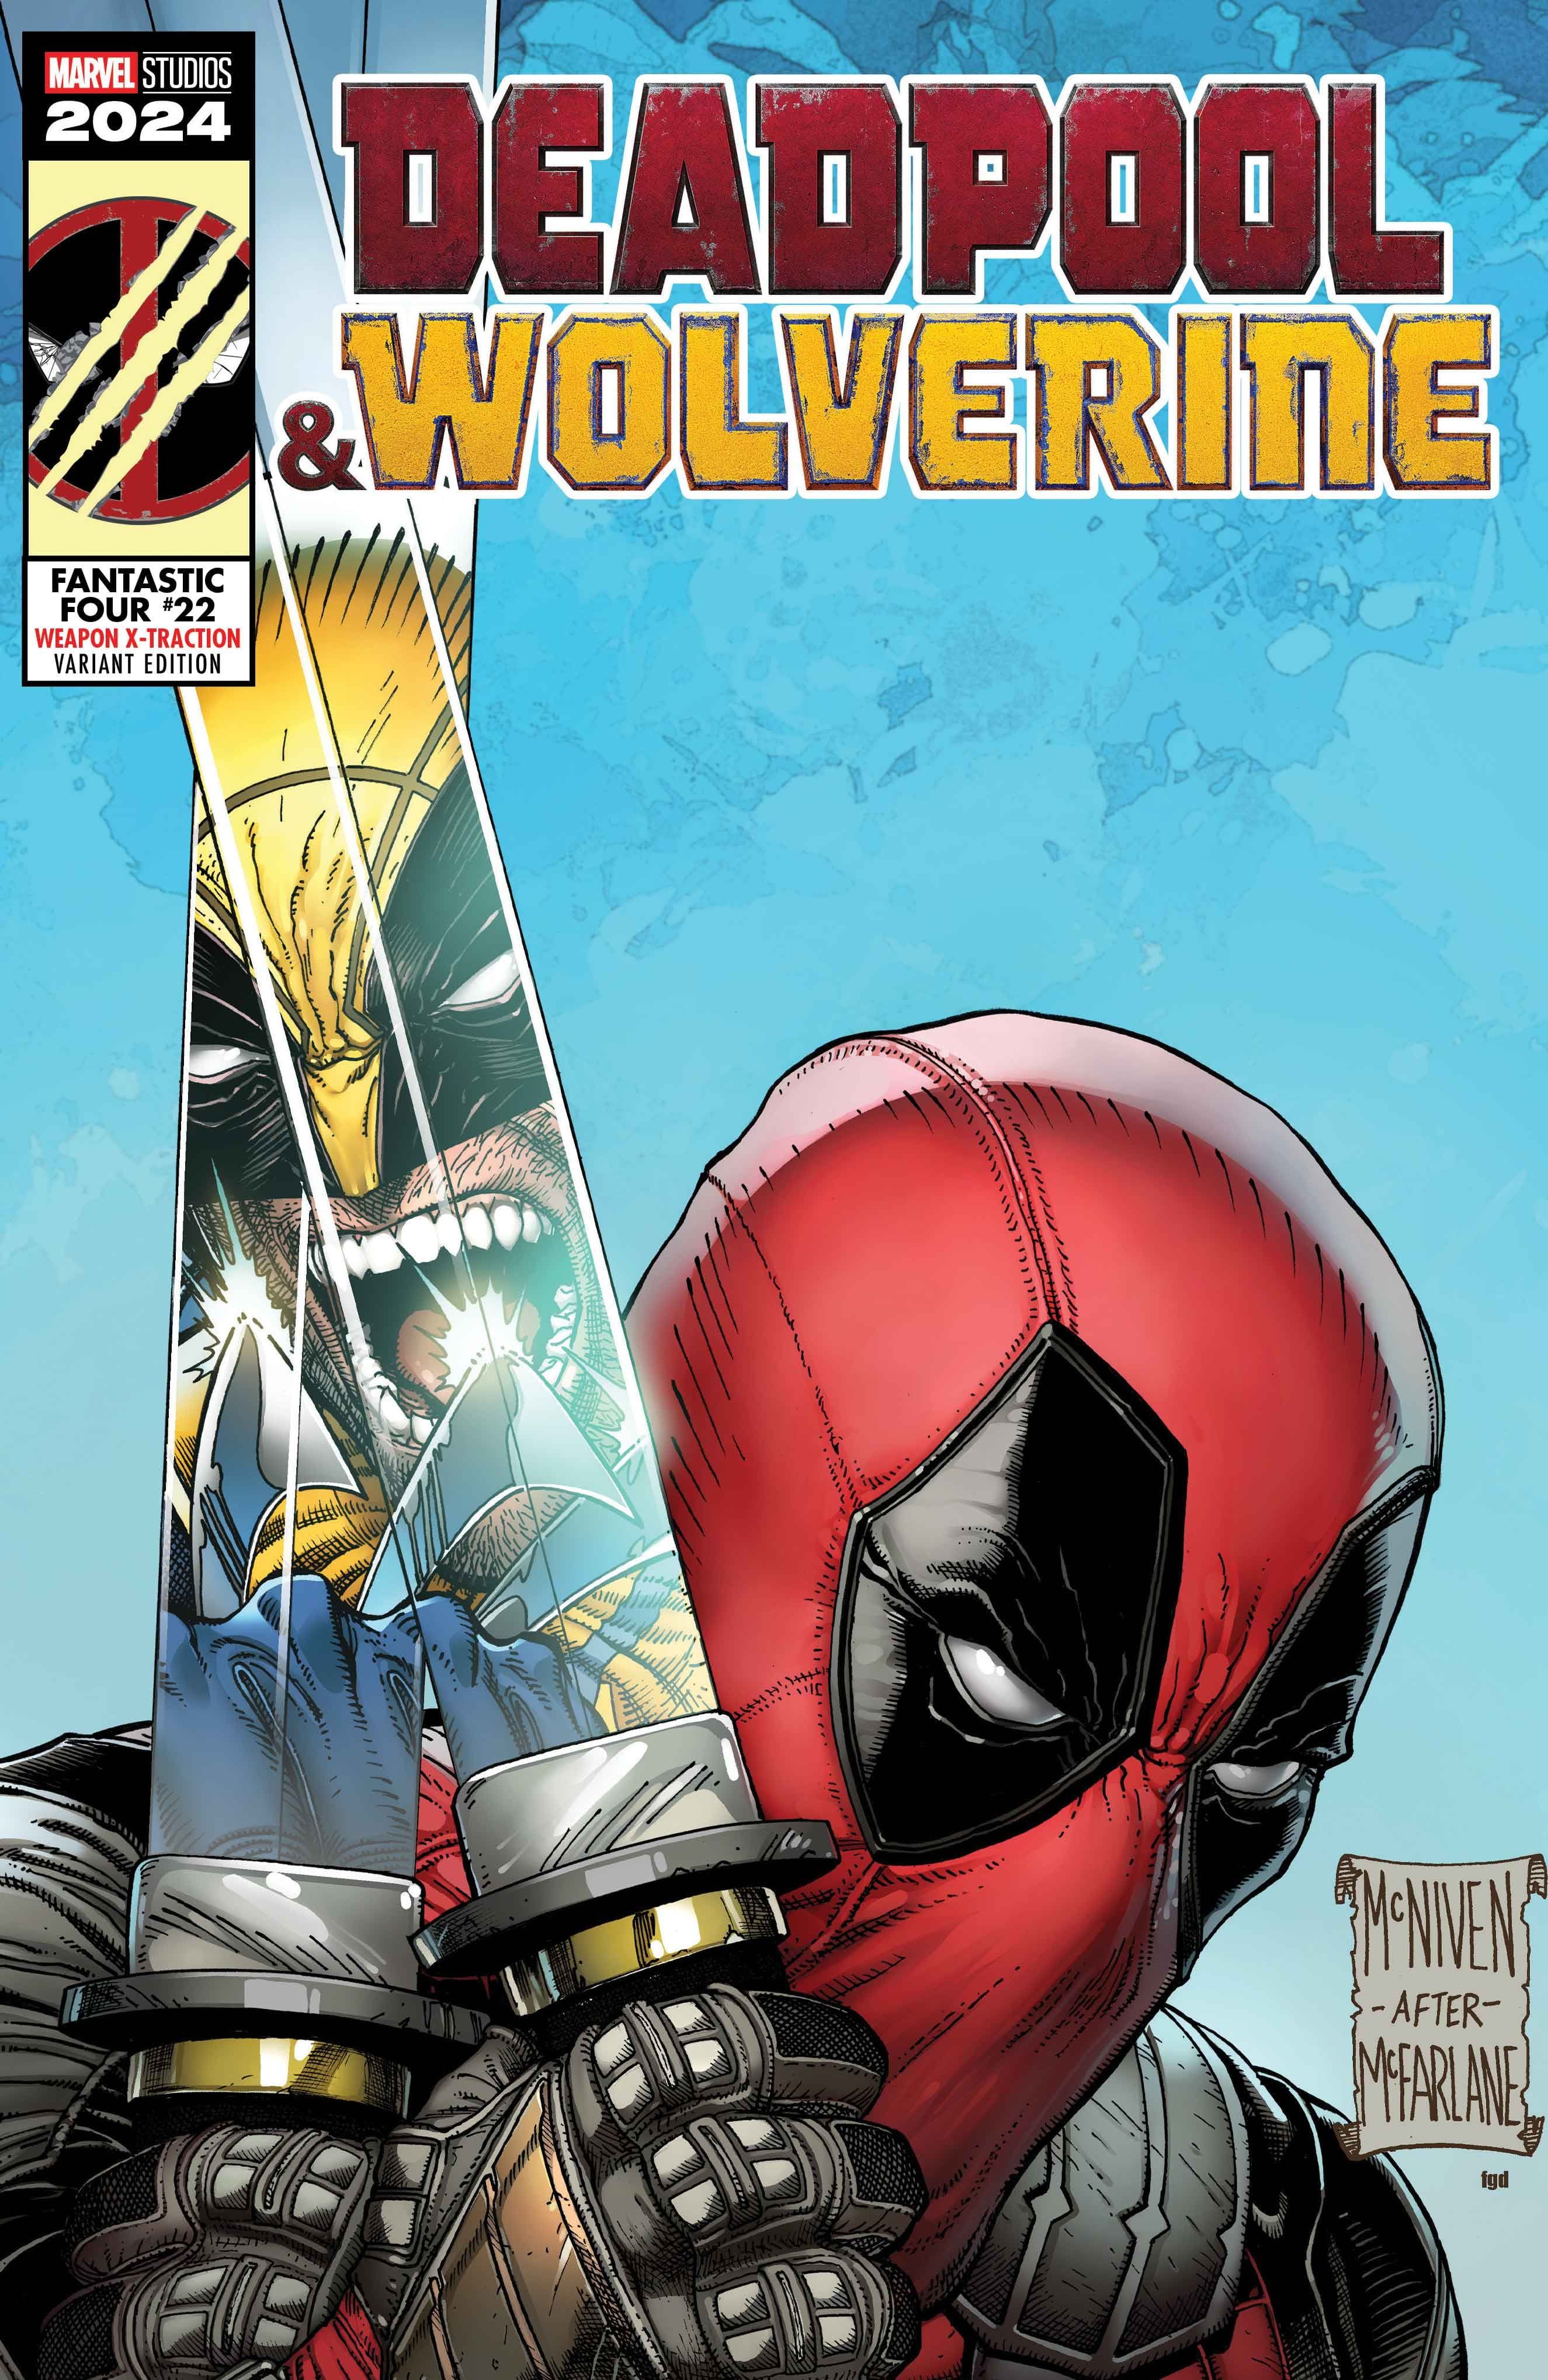 FANTASTIC FOUR #22 Deadpool & Wolverine Weapon X-Traction Variant Cover by Steve McNiven